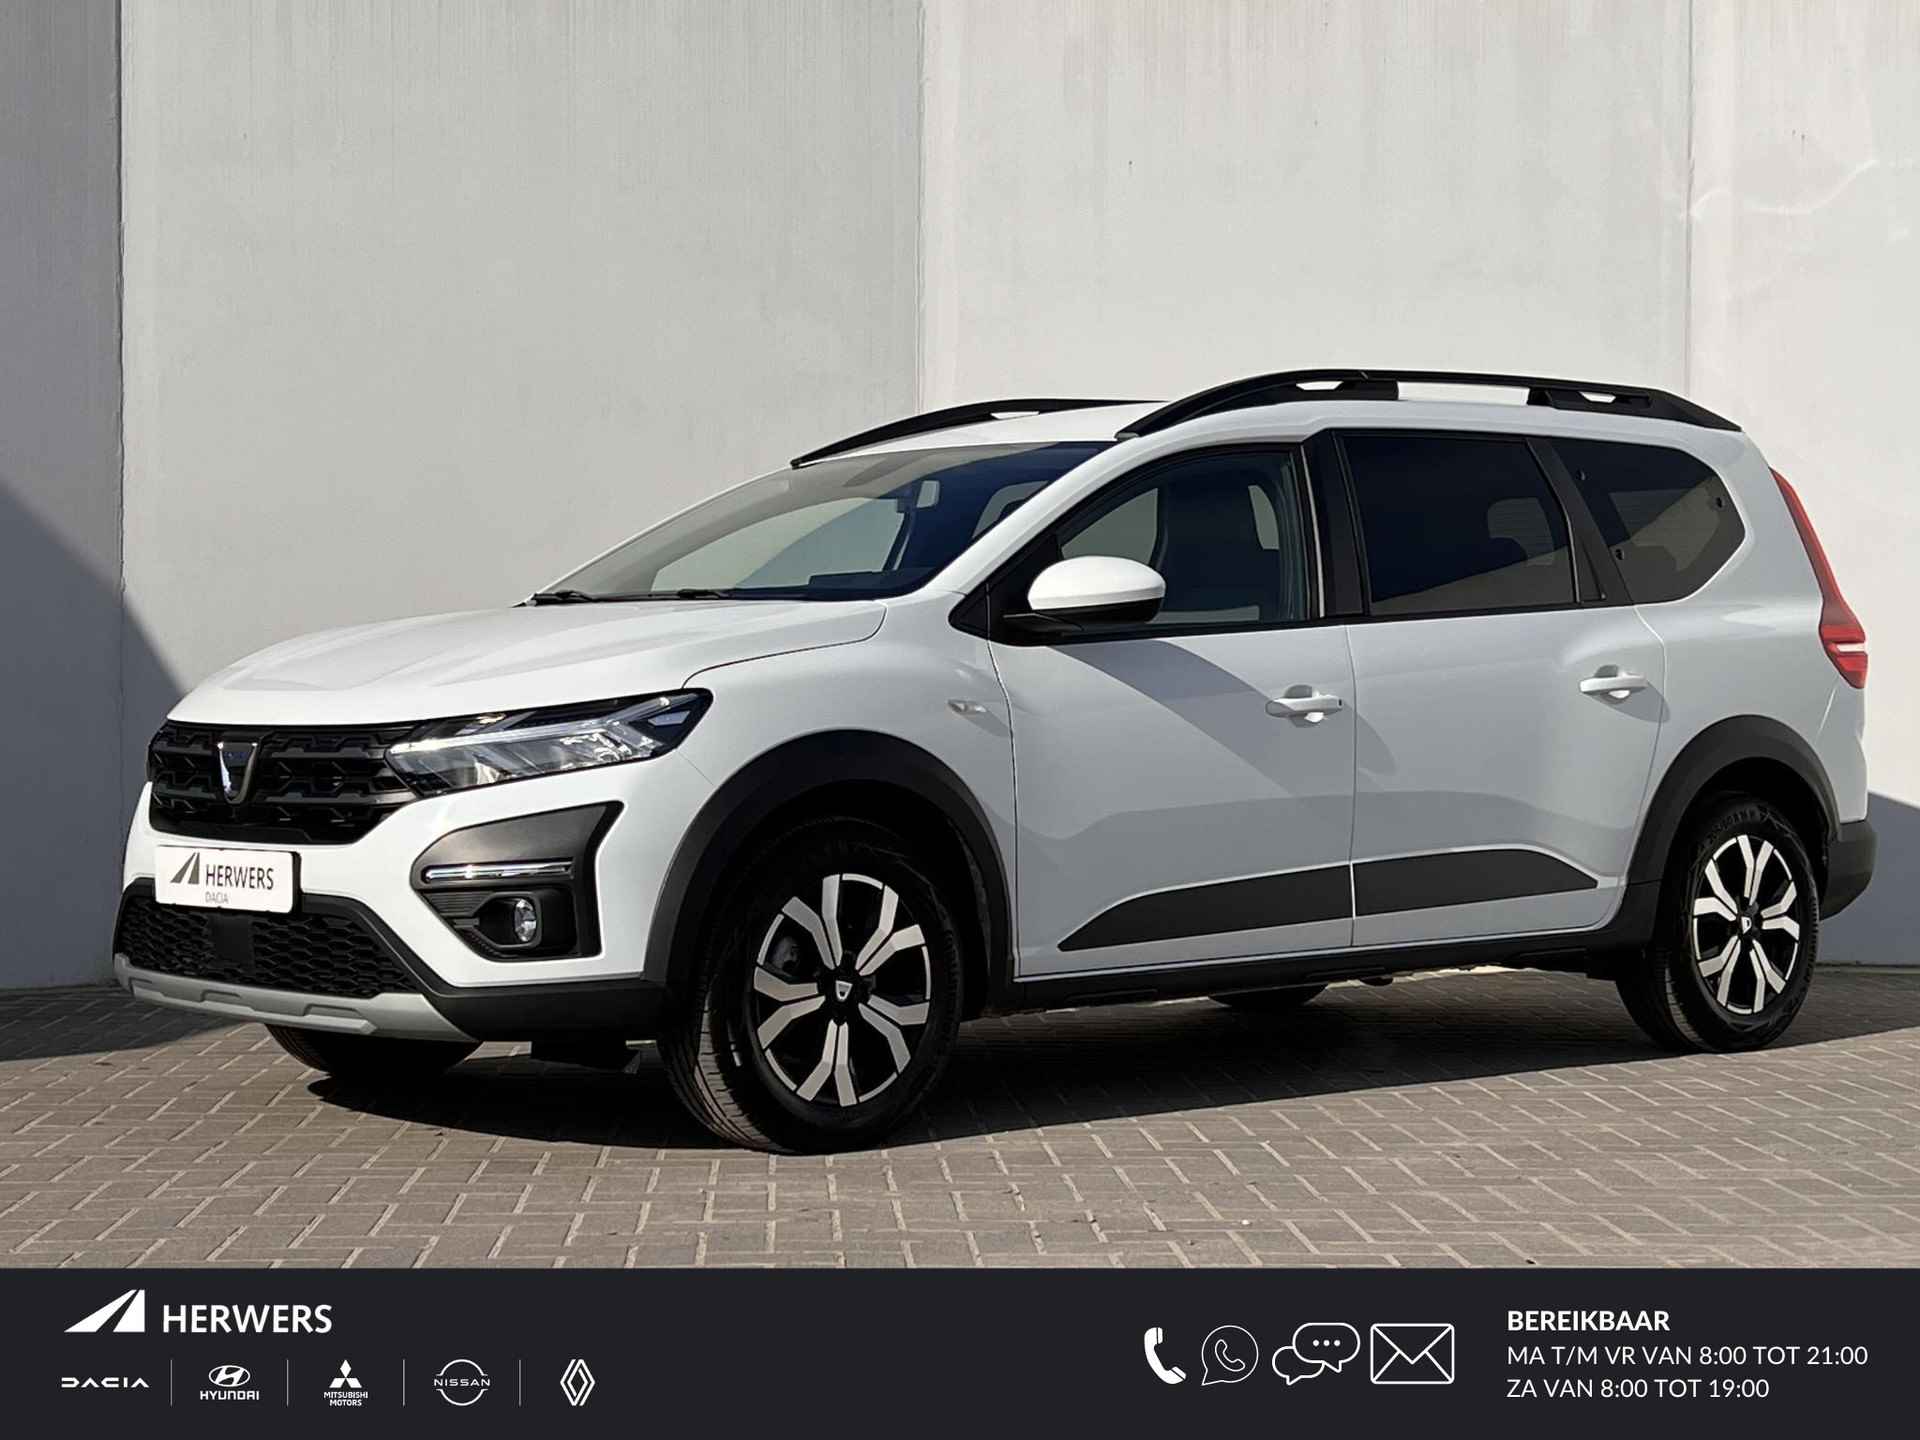 Dacia Jogger 1.0 TCe 110 Extreme 7p. / Zeven persoons / Navigatie via Apple Carplay of Android Auto / Stoelverwarming / - 1/49